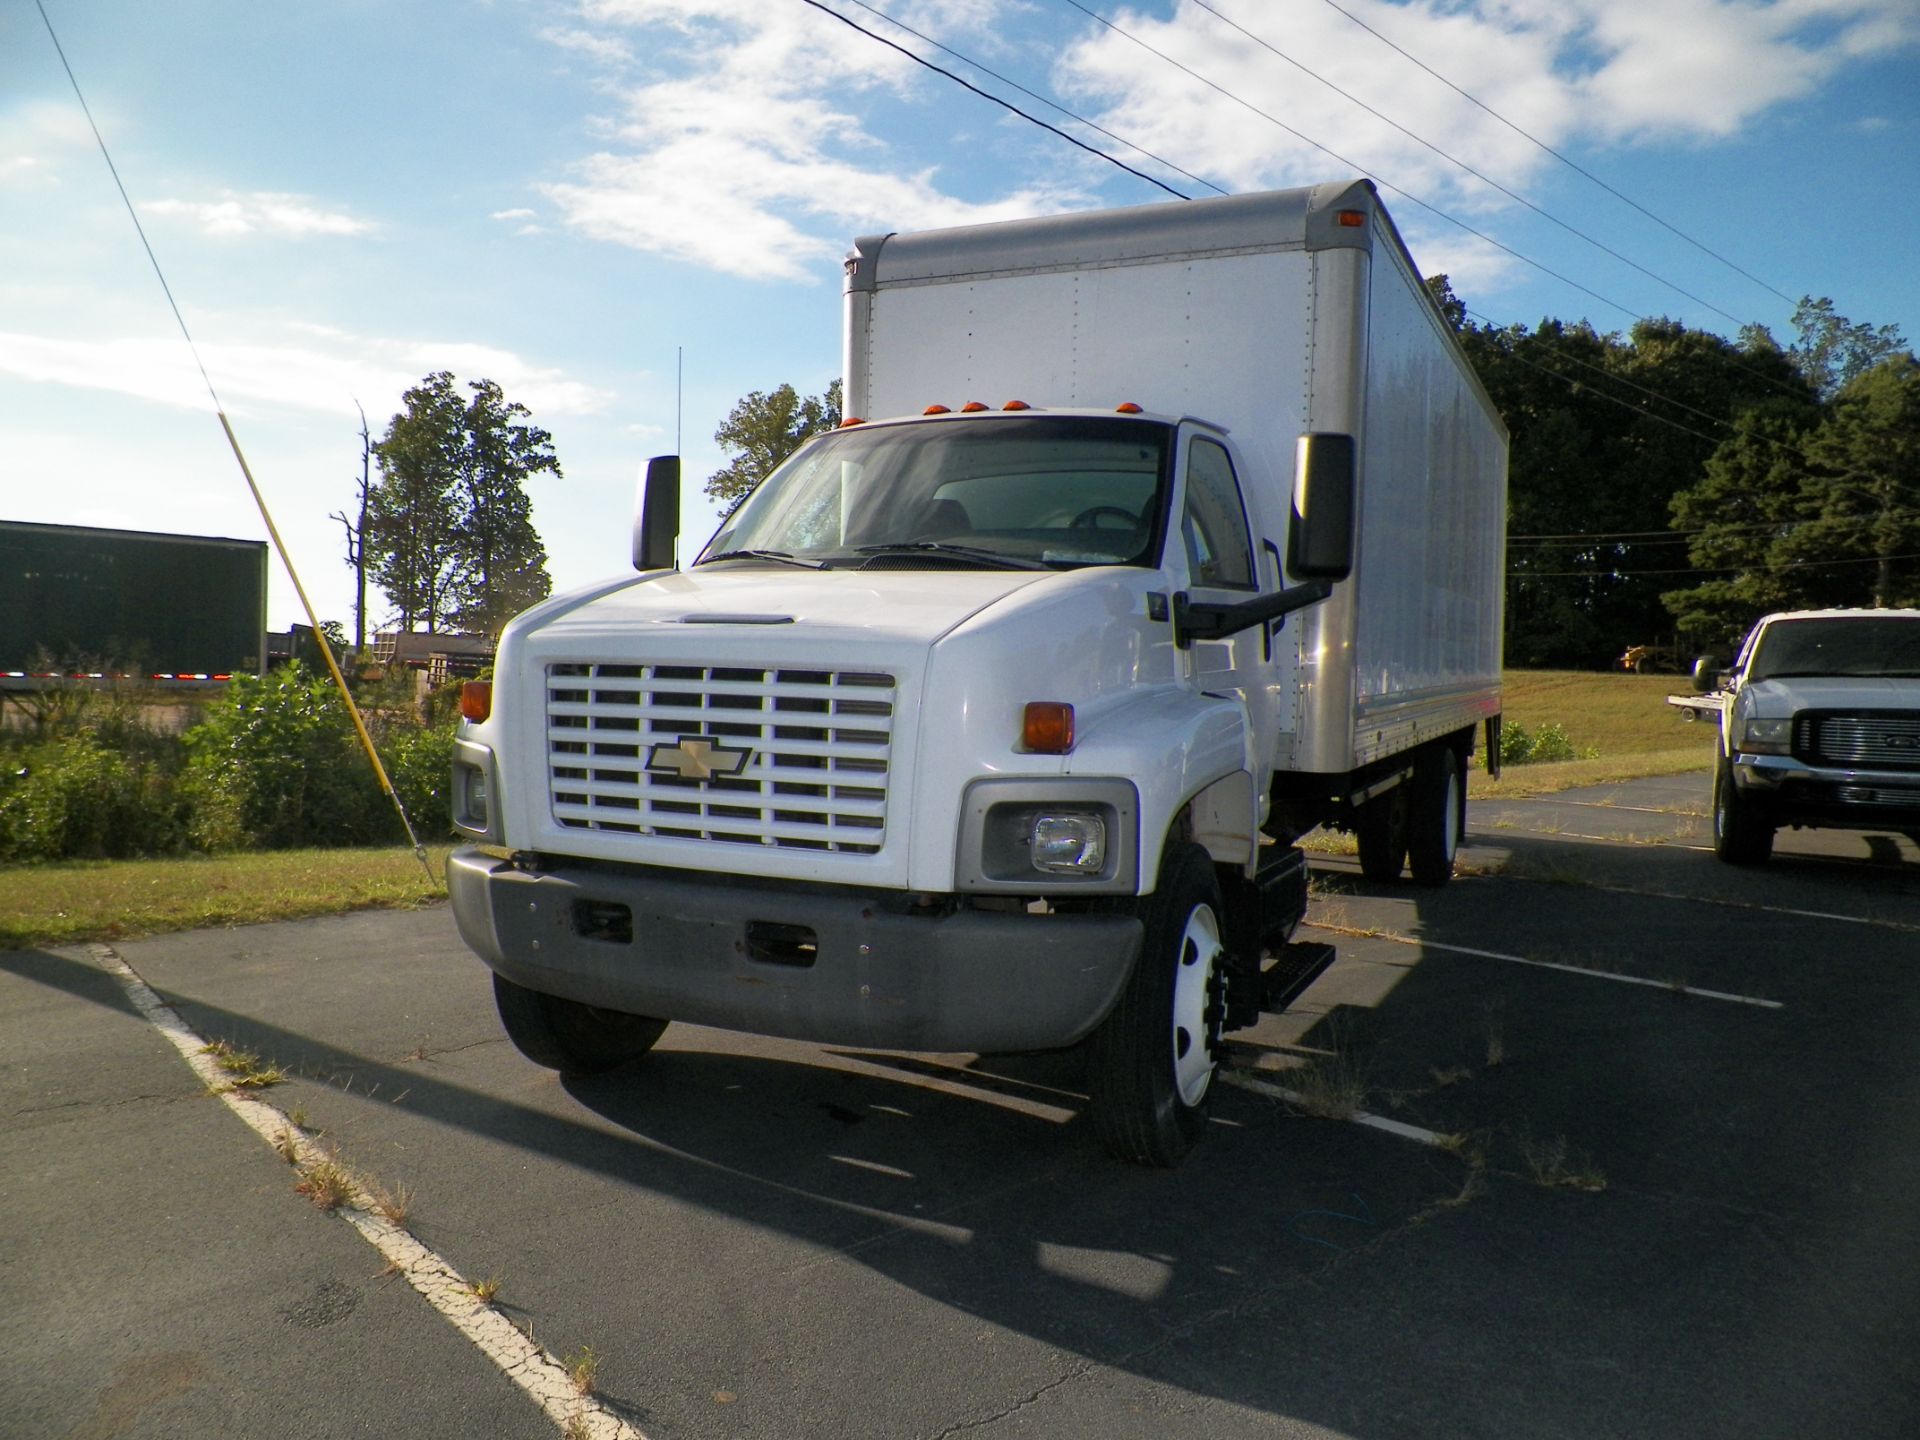 2004 c-6500 Chevrolet 24’ Box Truck with lift gate - Image 2 of 3